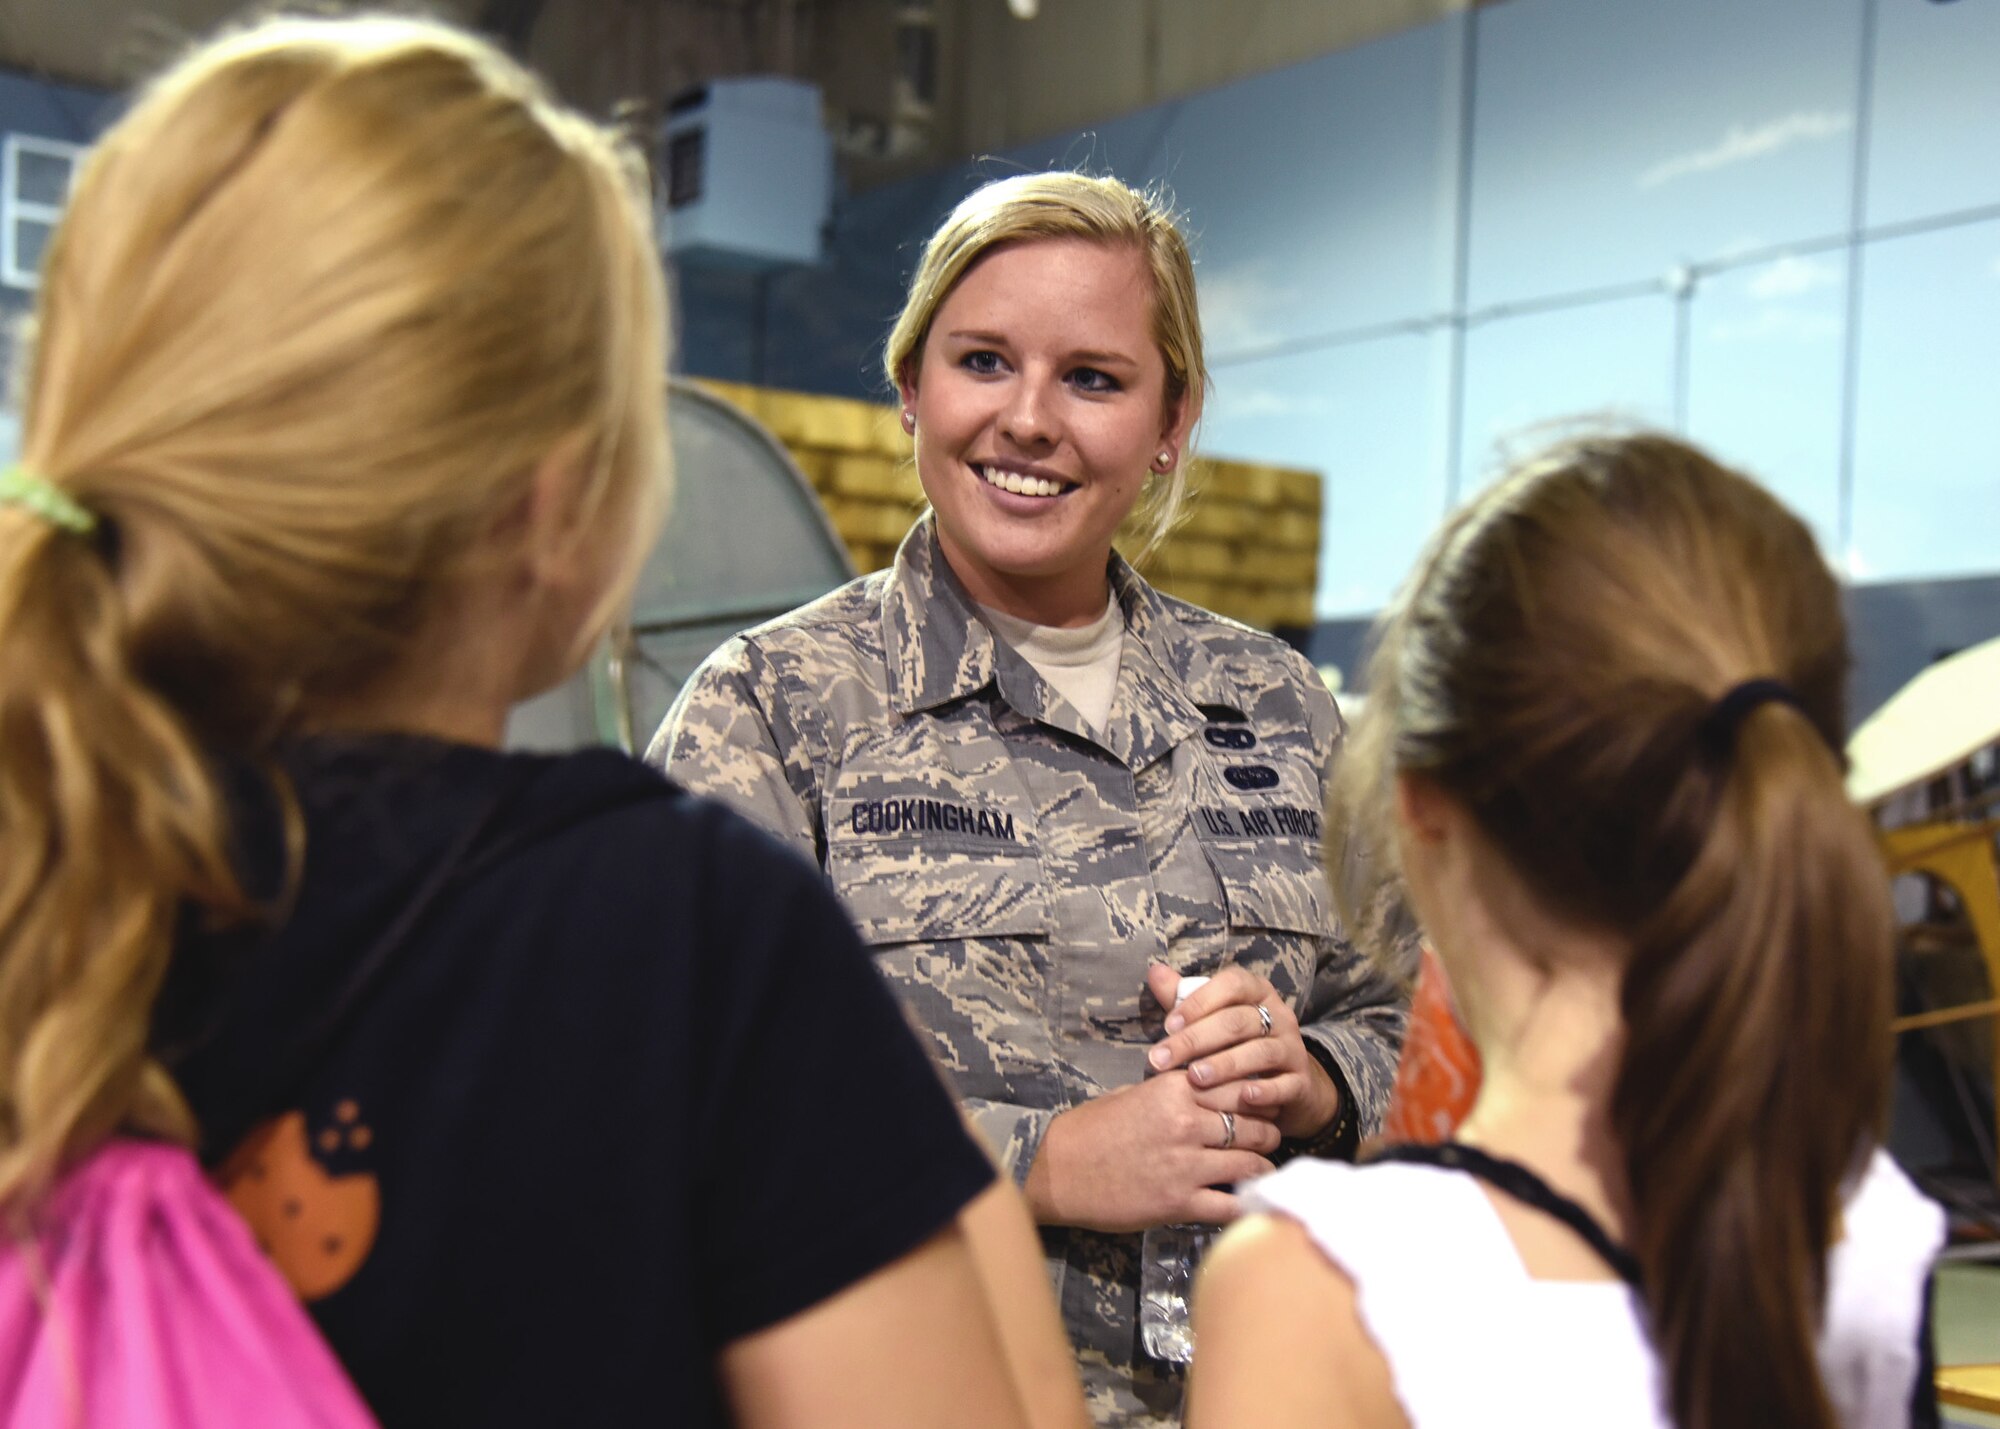 Staff Sgt. Tatiana Cookingham of the 117th Maintenance Squadron talks to young women during the Women in Aviation event at the Southern Museum of Flight